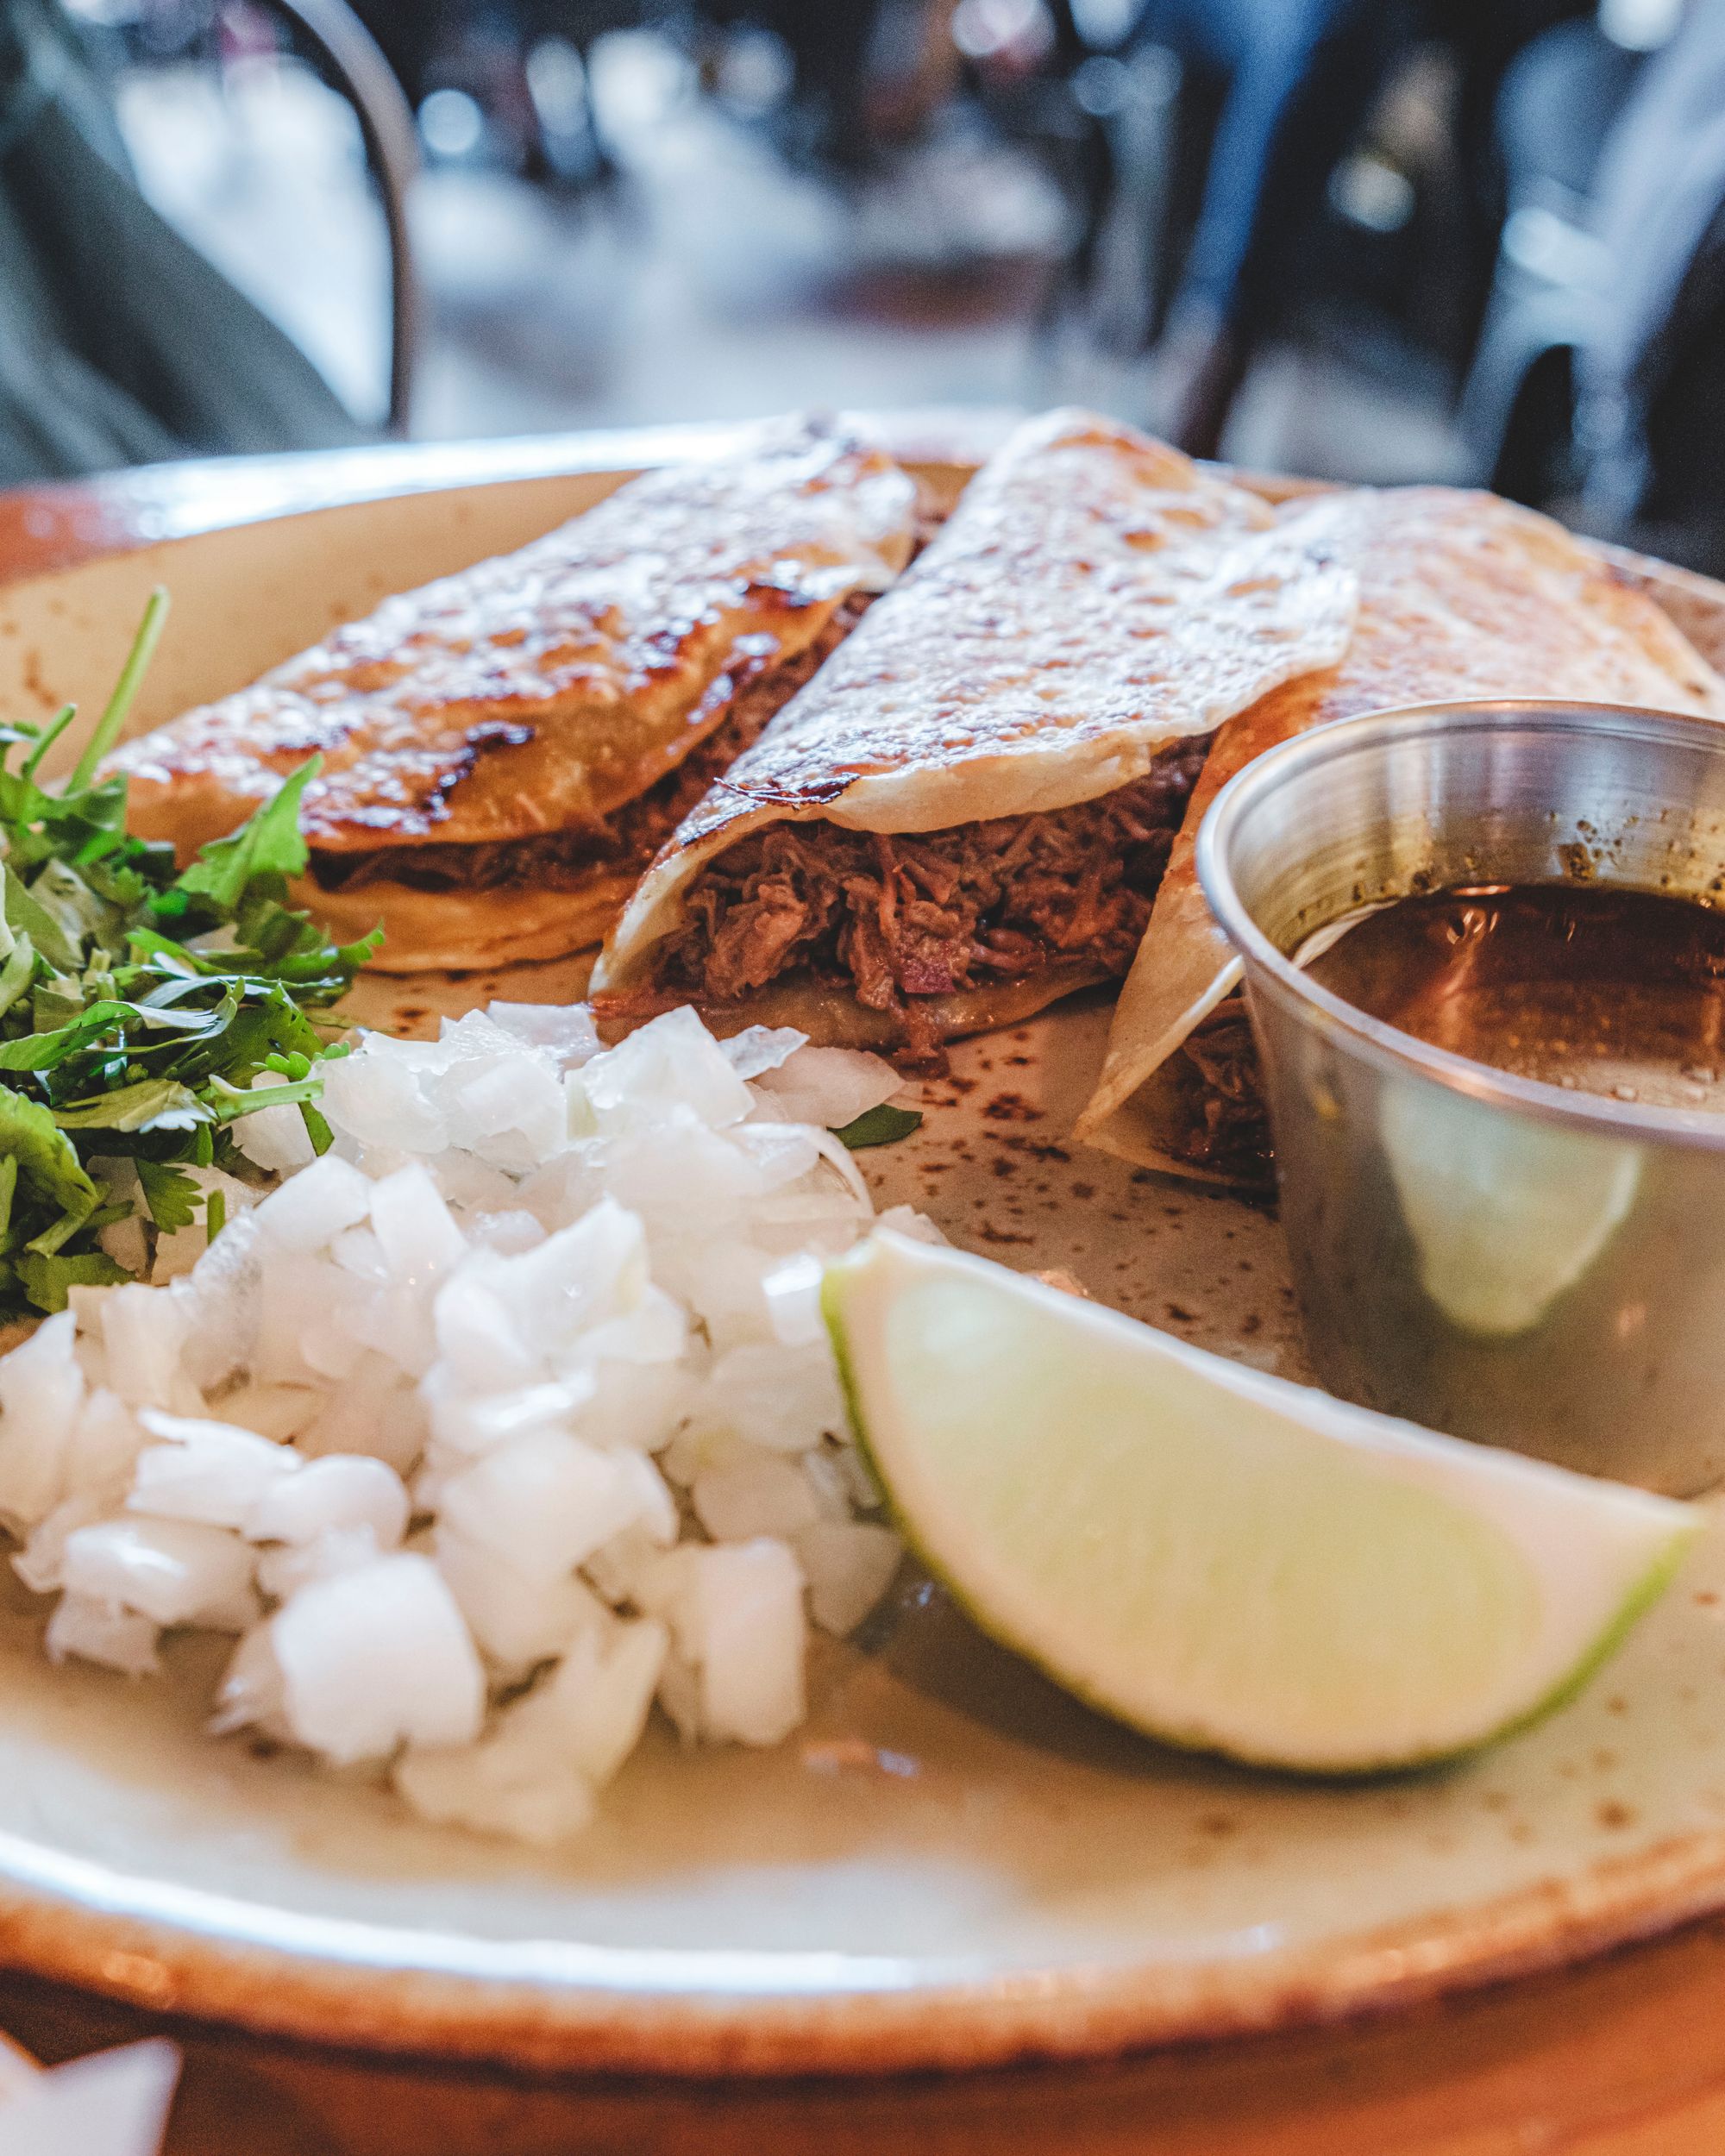 Alimentaria Mexicana [REVIEW] – Fancier Mexican for the Granville Island Soul